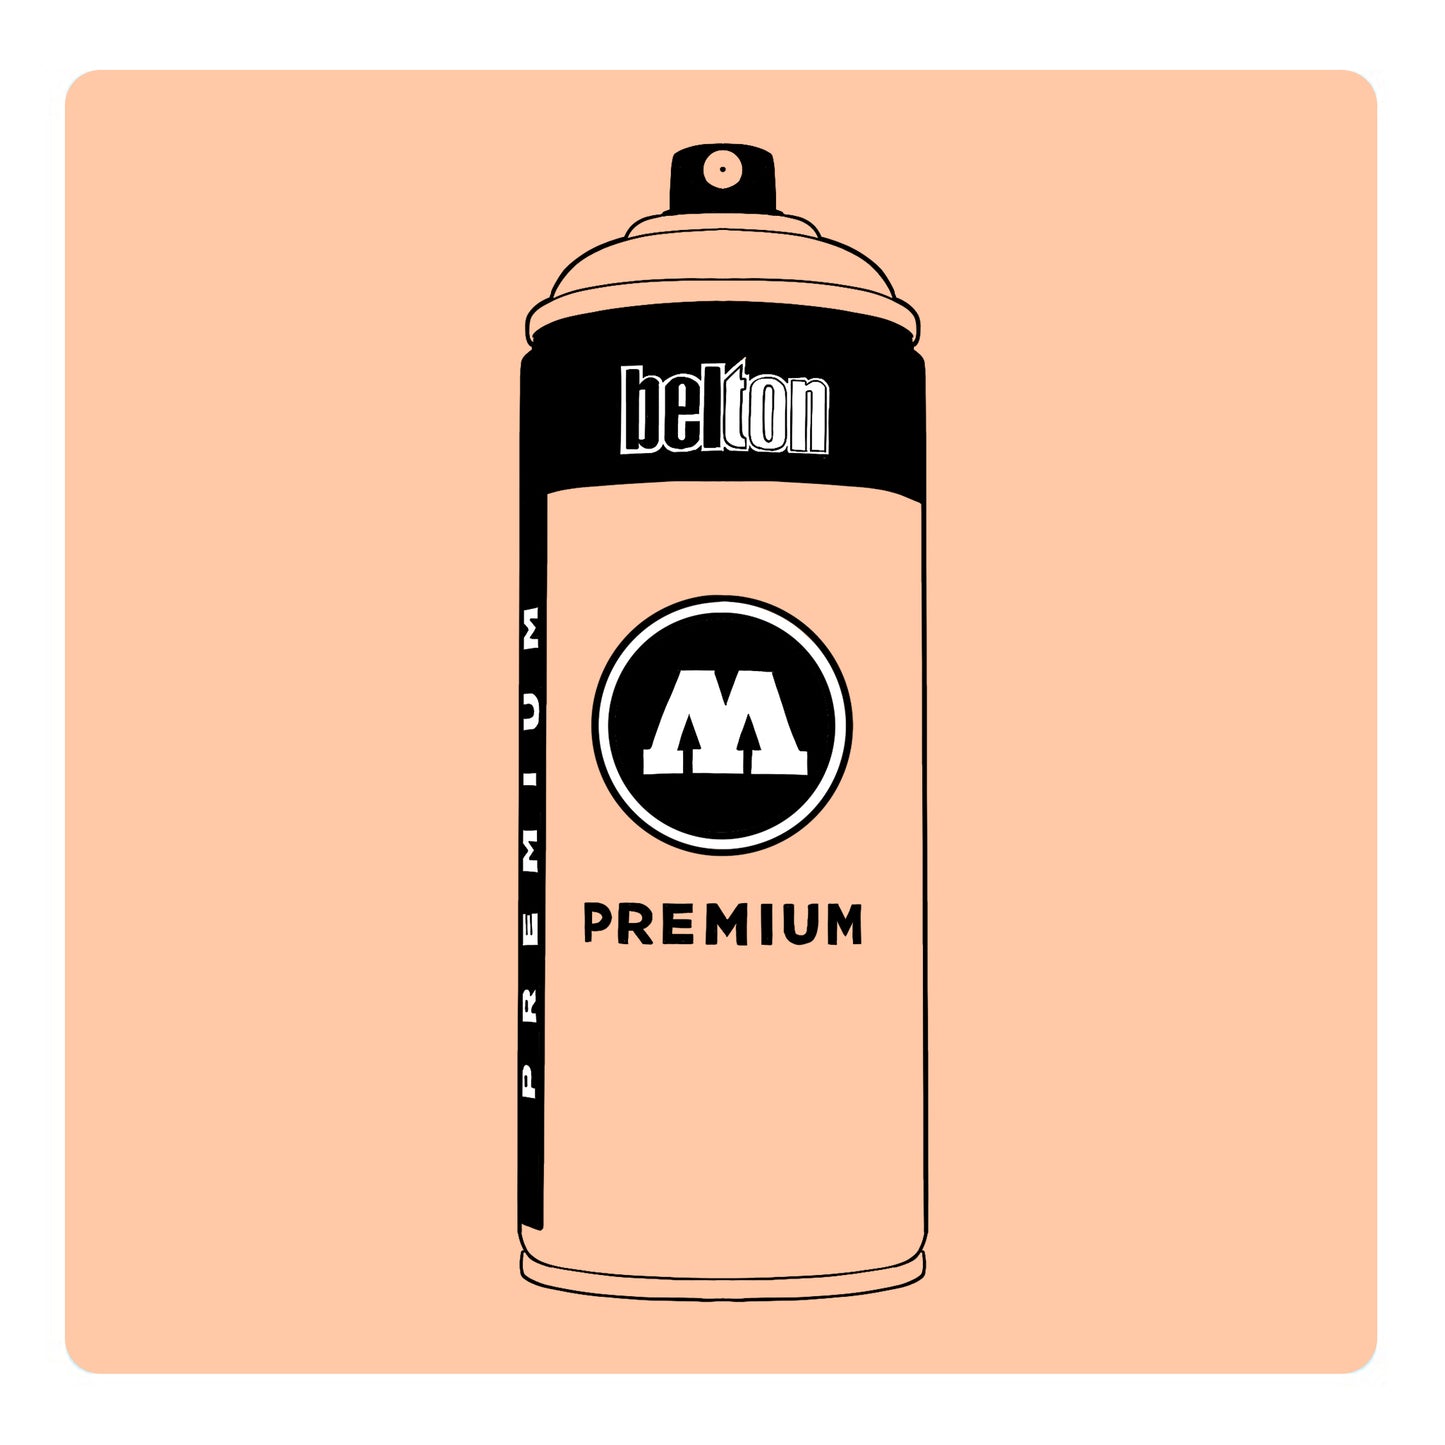 A black outline drawing of a beige spray paint can with the words "belton","premium" and the letter"M" written on the face in black and white font. The background is a color swatch of the same beige with a white border.